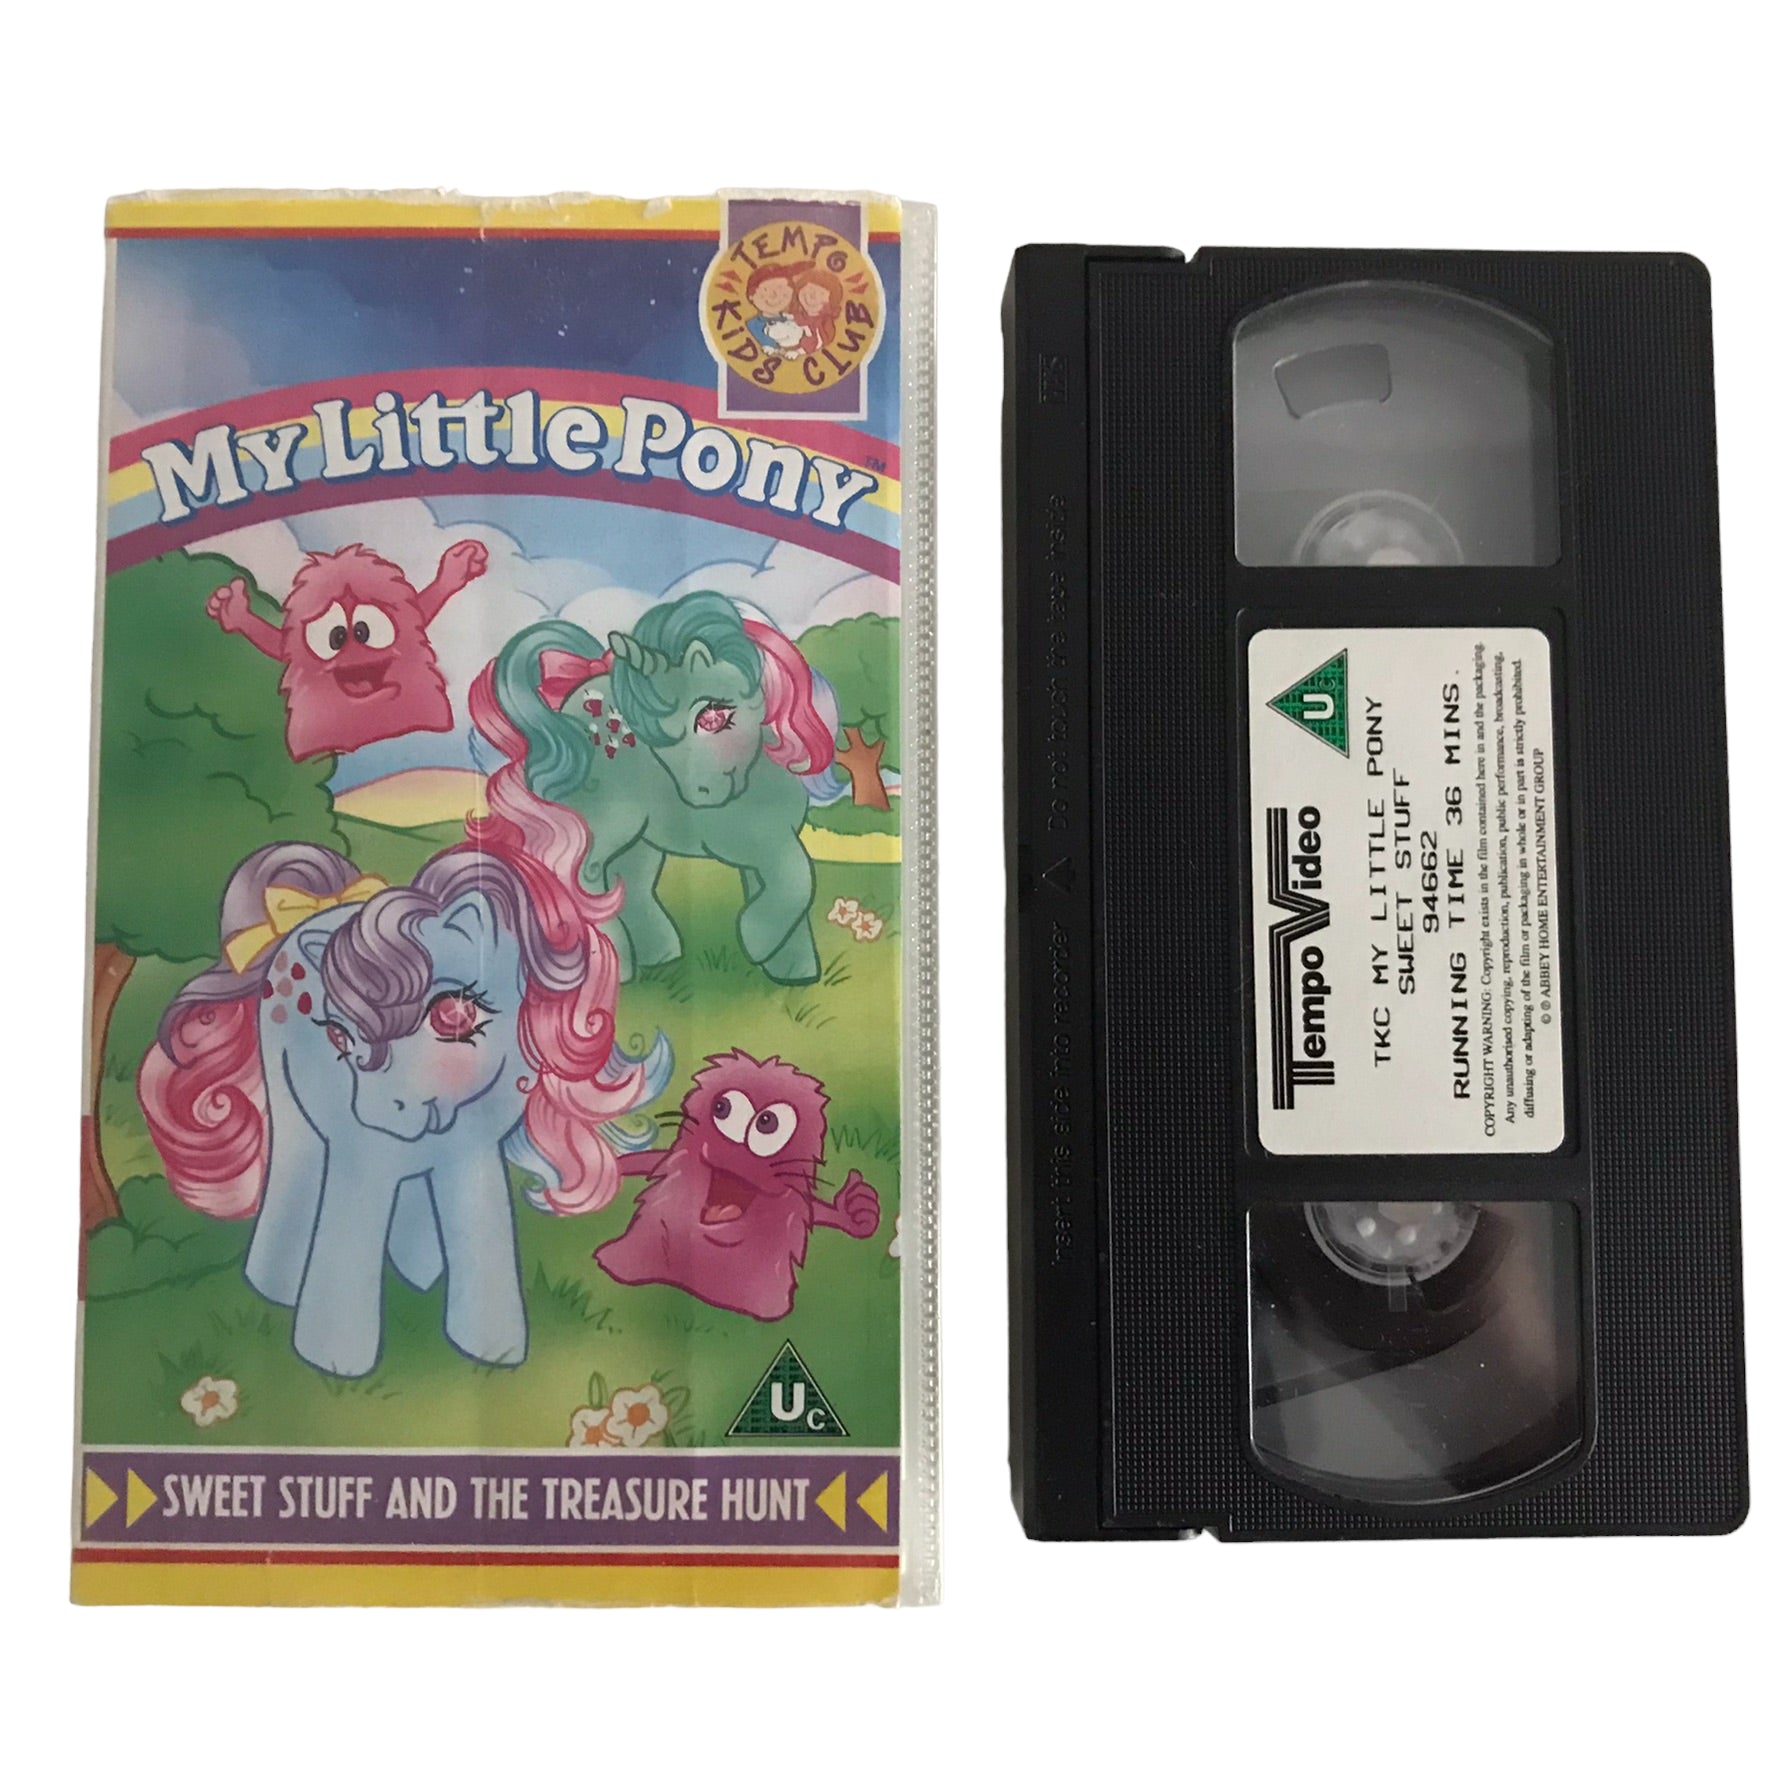 My Little Pony - Sweet Stuff And The Treasure Hunt - Tempo Video - 94662 - Kids - Pal - VHS-